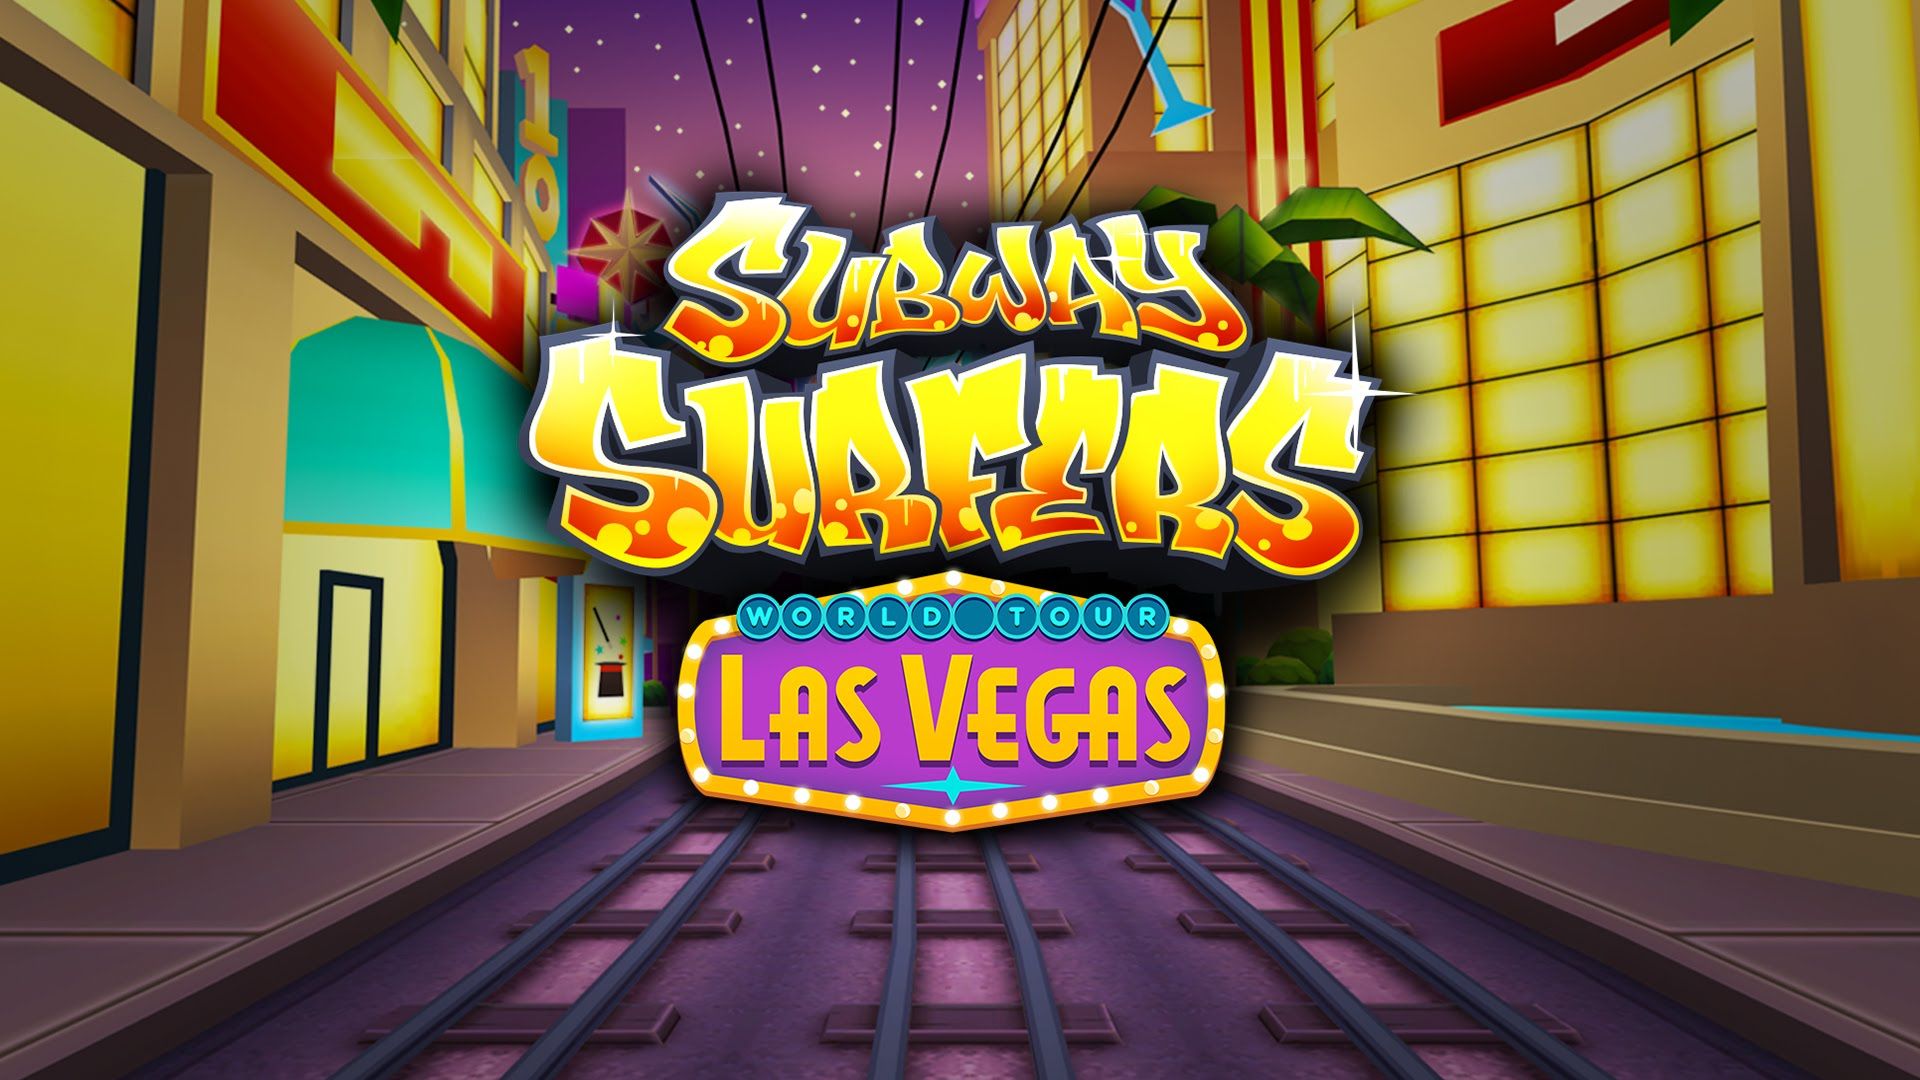 Subway Surfers Wallpaper HD. Full HD Picture